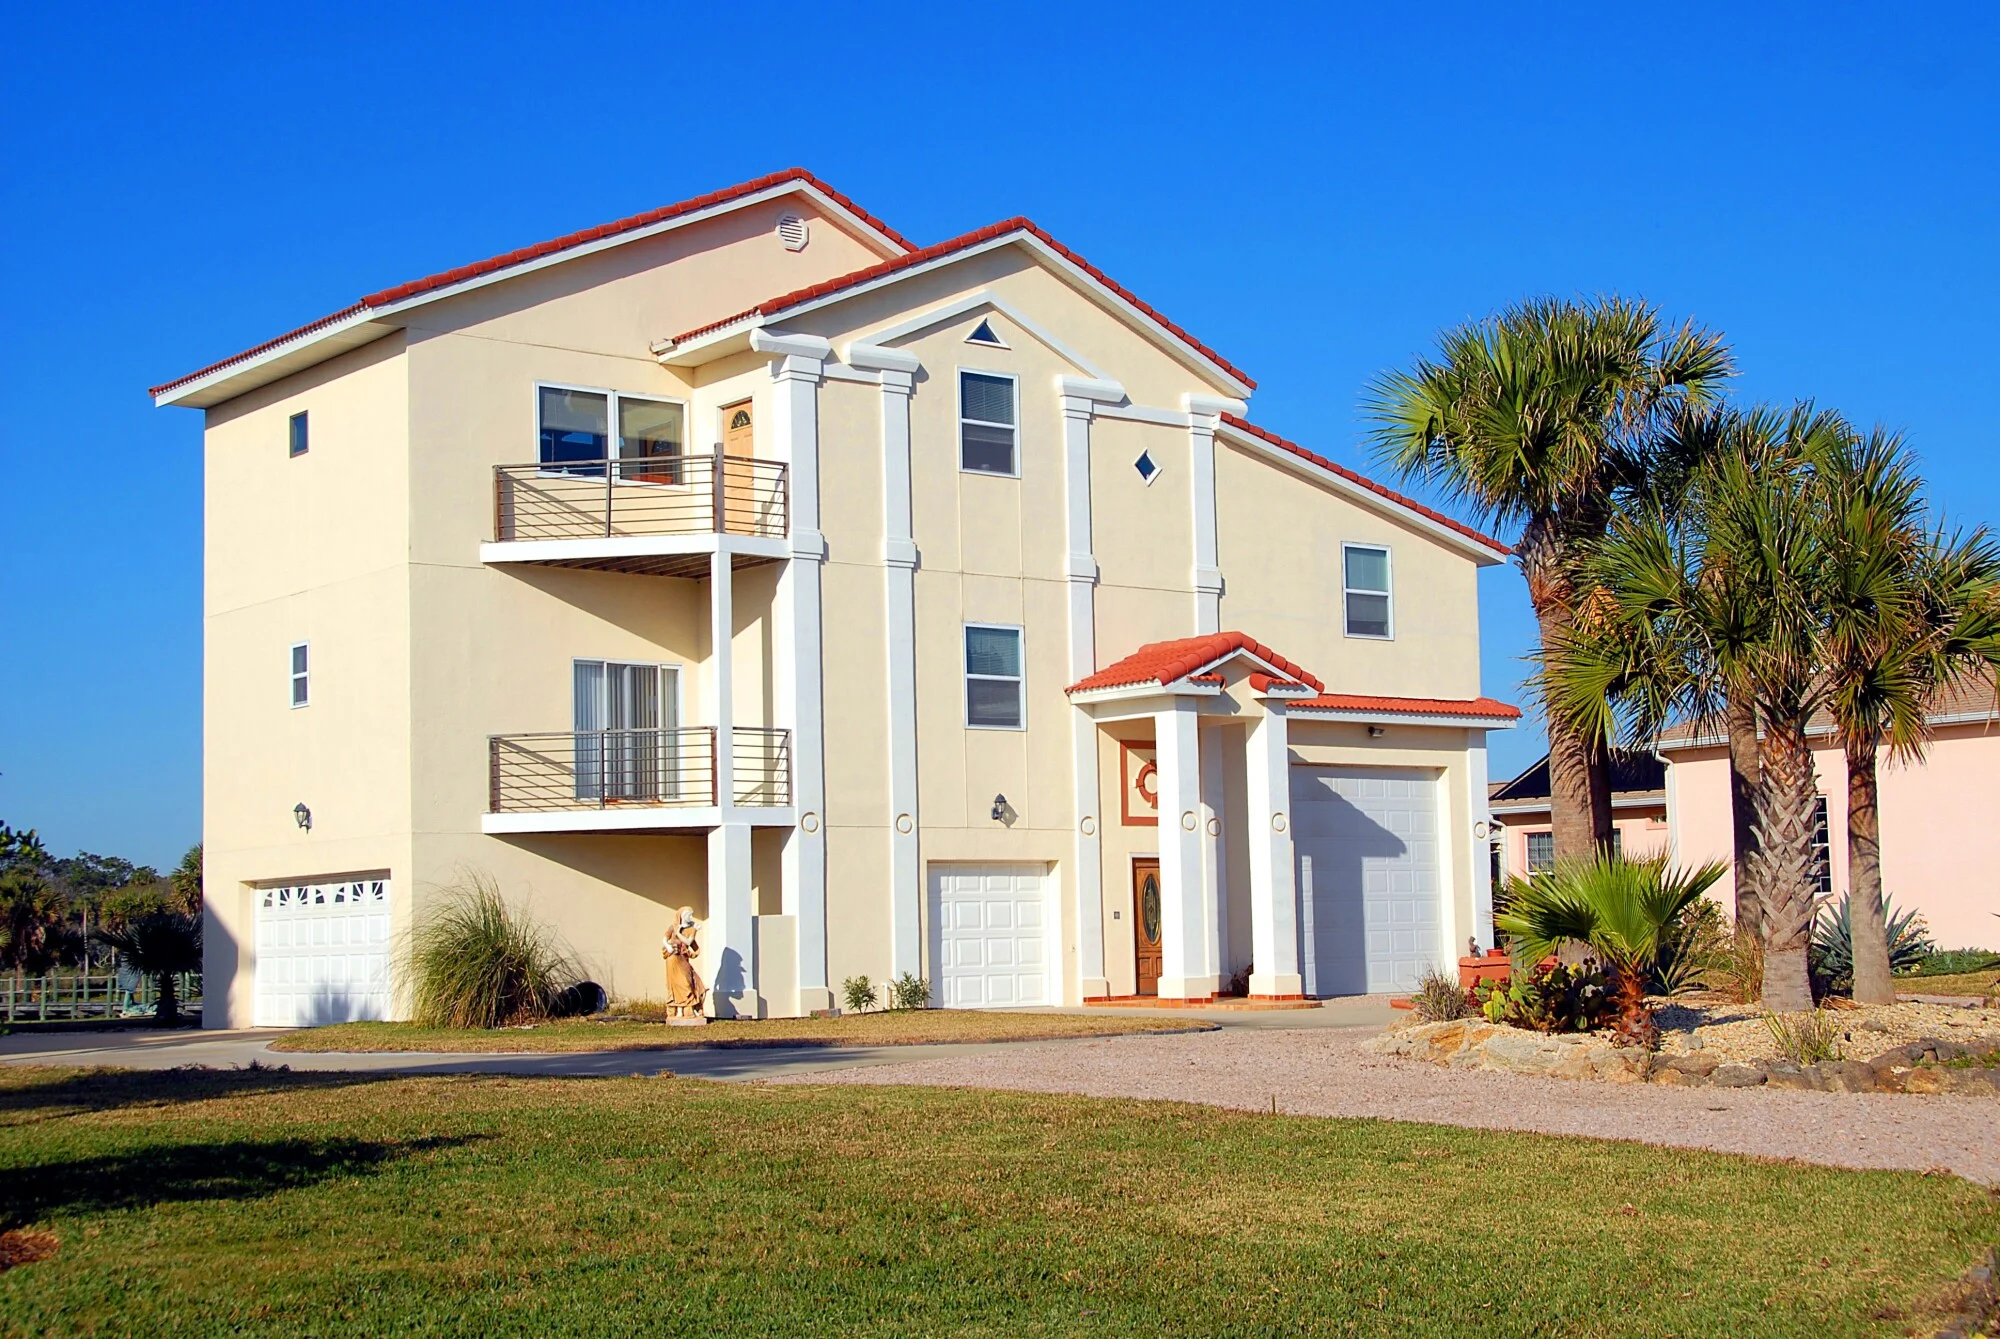 3 Things to Consider before Starting a Short-Term Rental in Lake Worth, FL